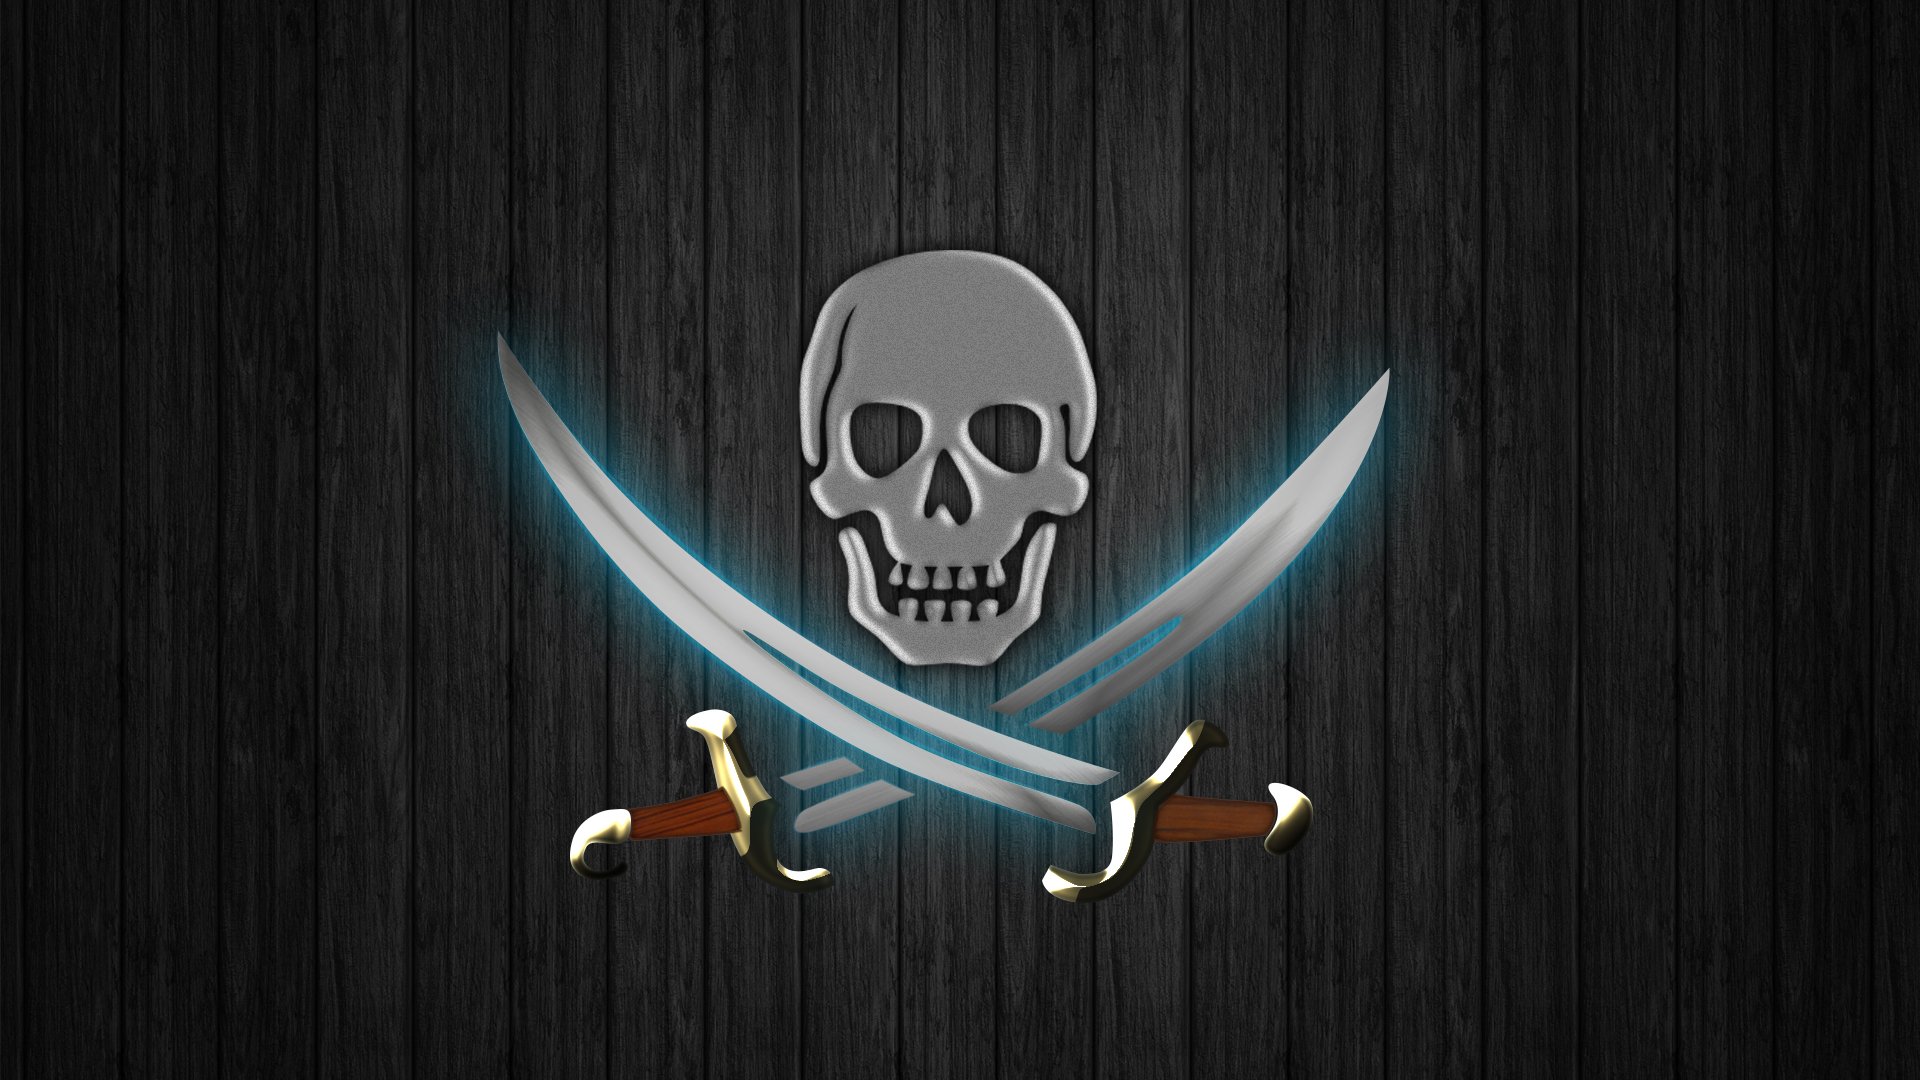 Pirate Skull With Crosses And Skulls Wallpaper Background, Picture Of Skull  And Crossbones Background Image And Wallpaper for Free Download